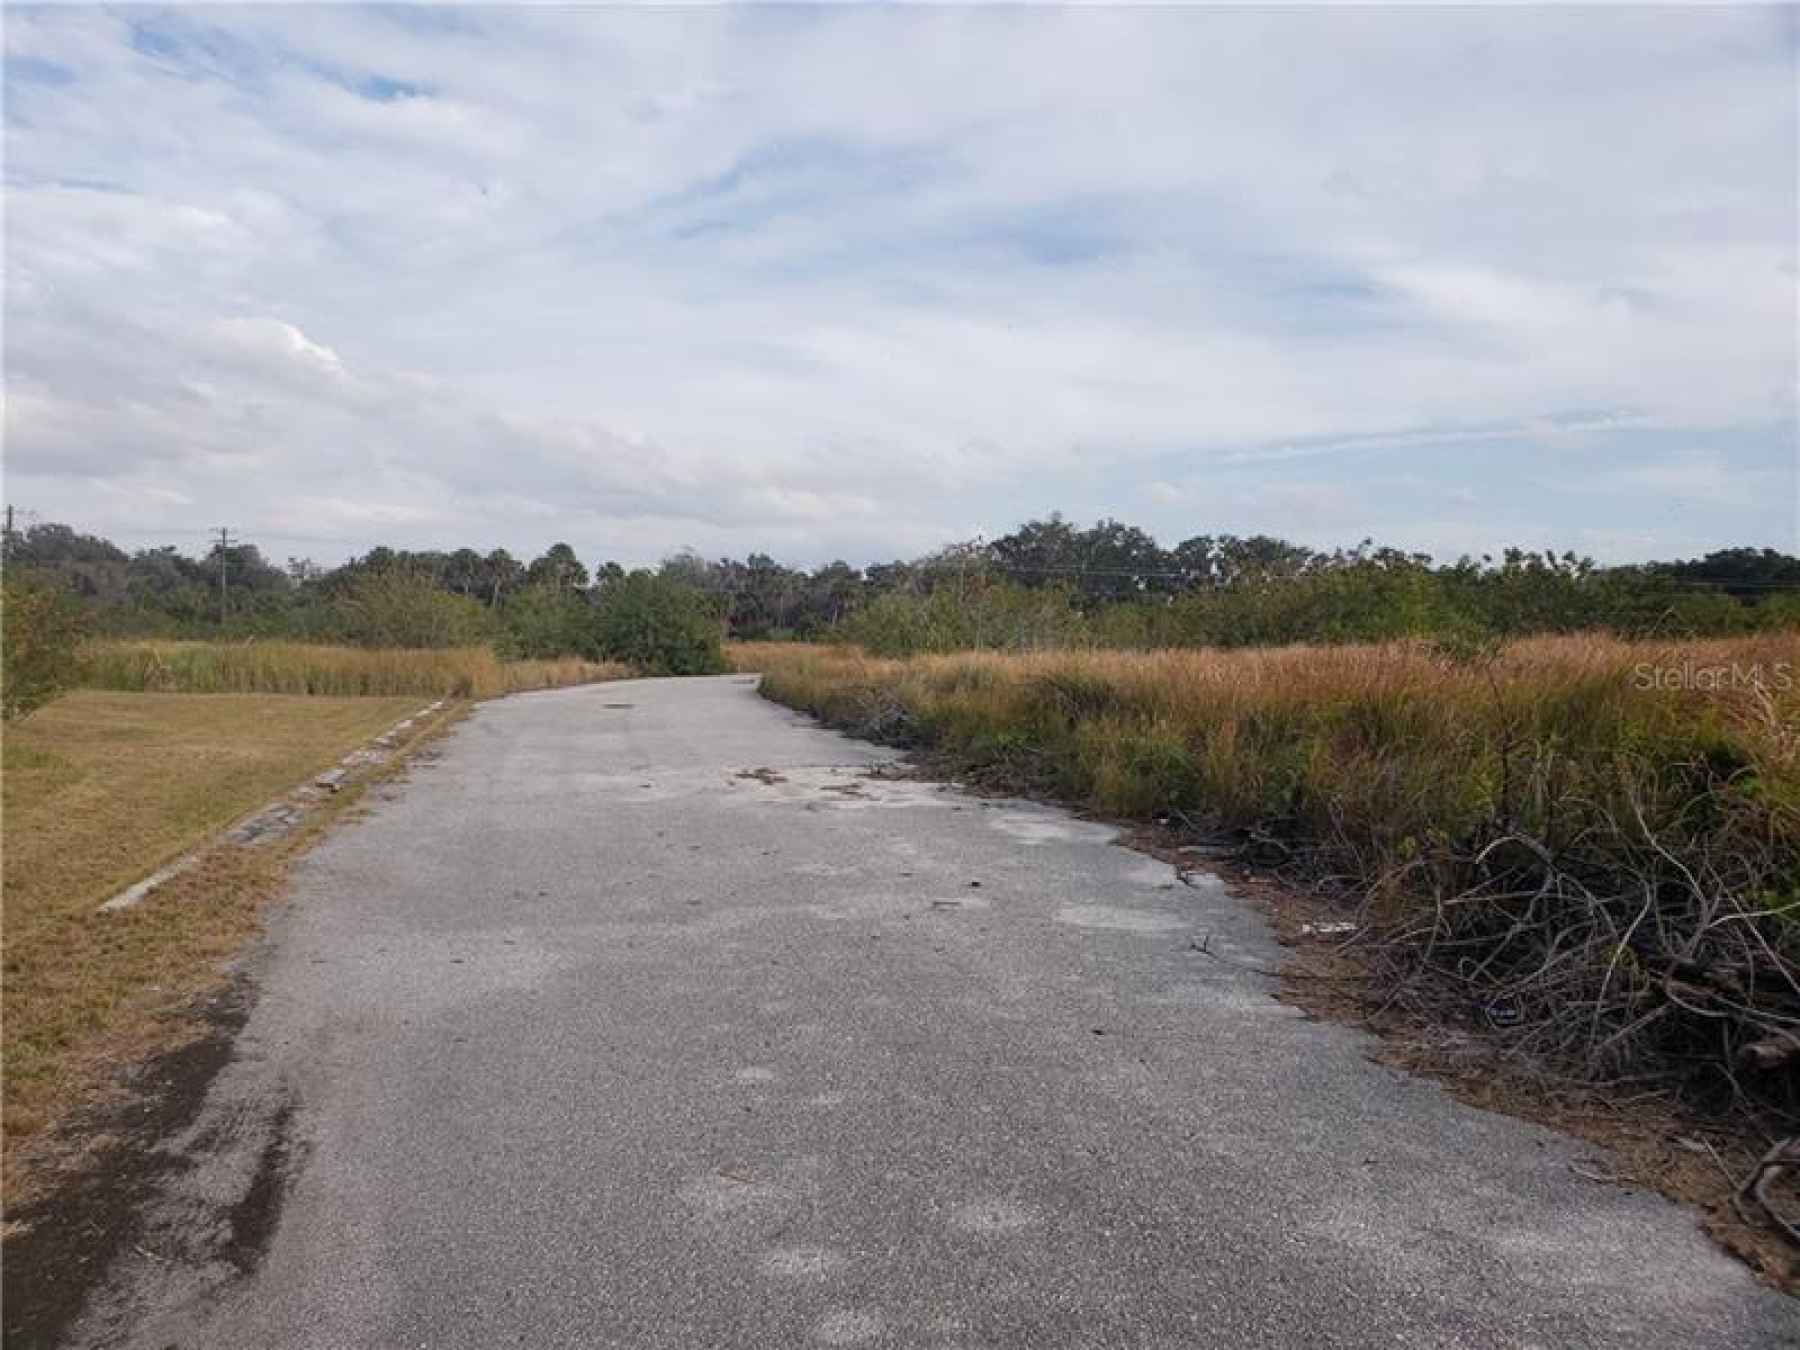 Paved Road to the Eastern part of the property.